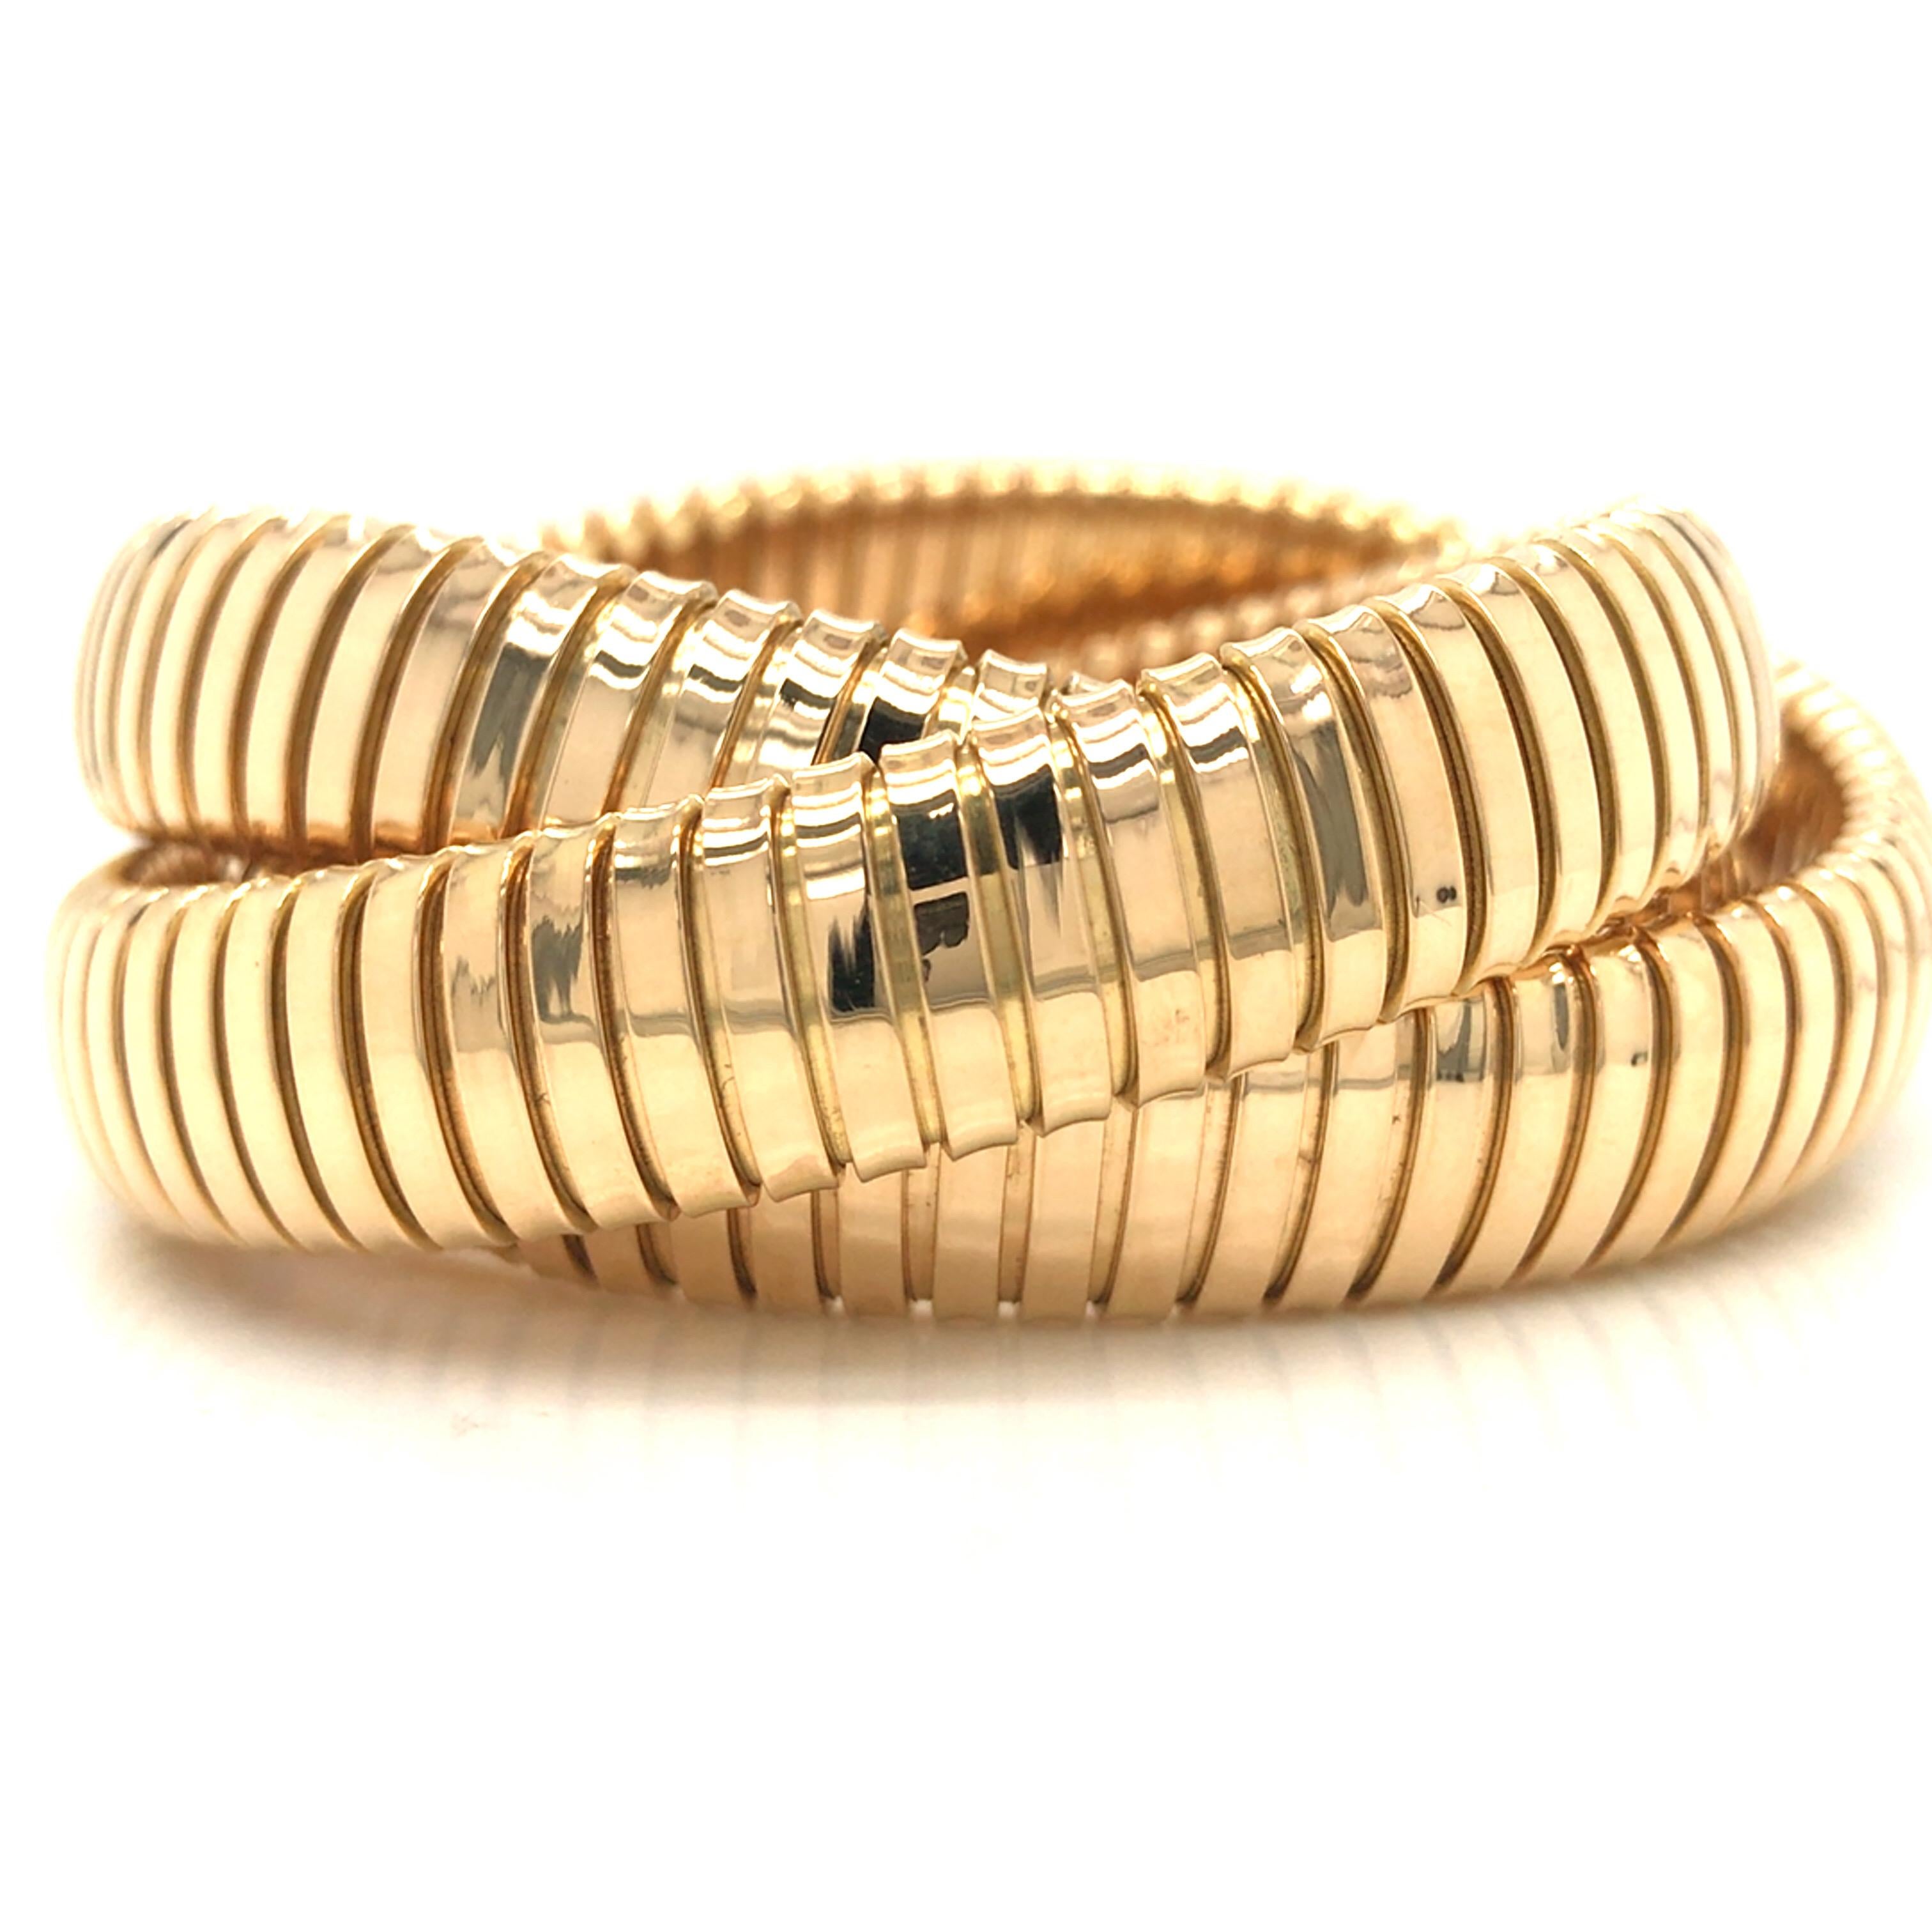 Sidney Garber Rolling Interlinked Bracelet in 18K Yellow Gold.  The Bracelet measures 6 inch inner circumference and each bangle measures 1/2 inch in width.  86.15 grams.  Stamped 750 Sidney Garber.